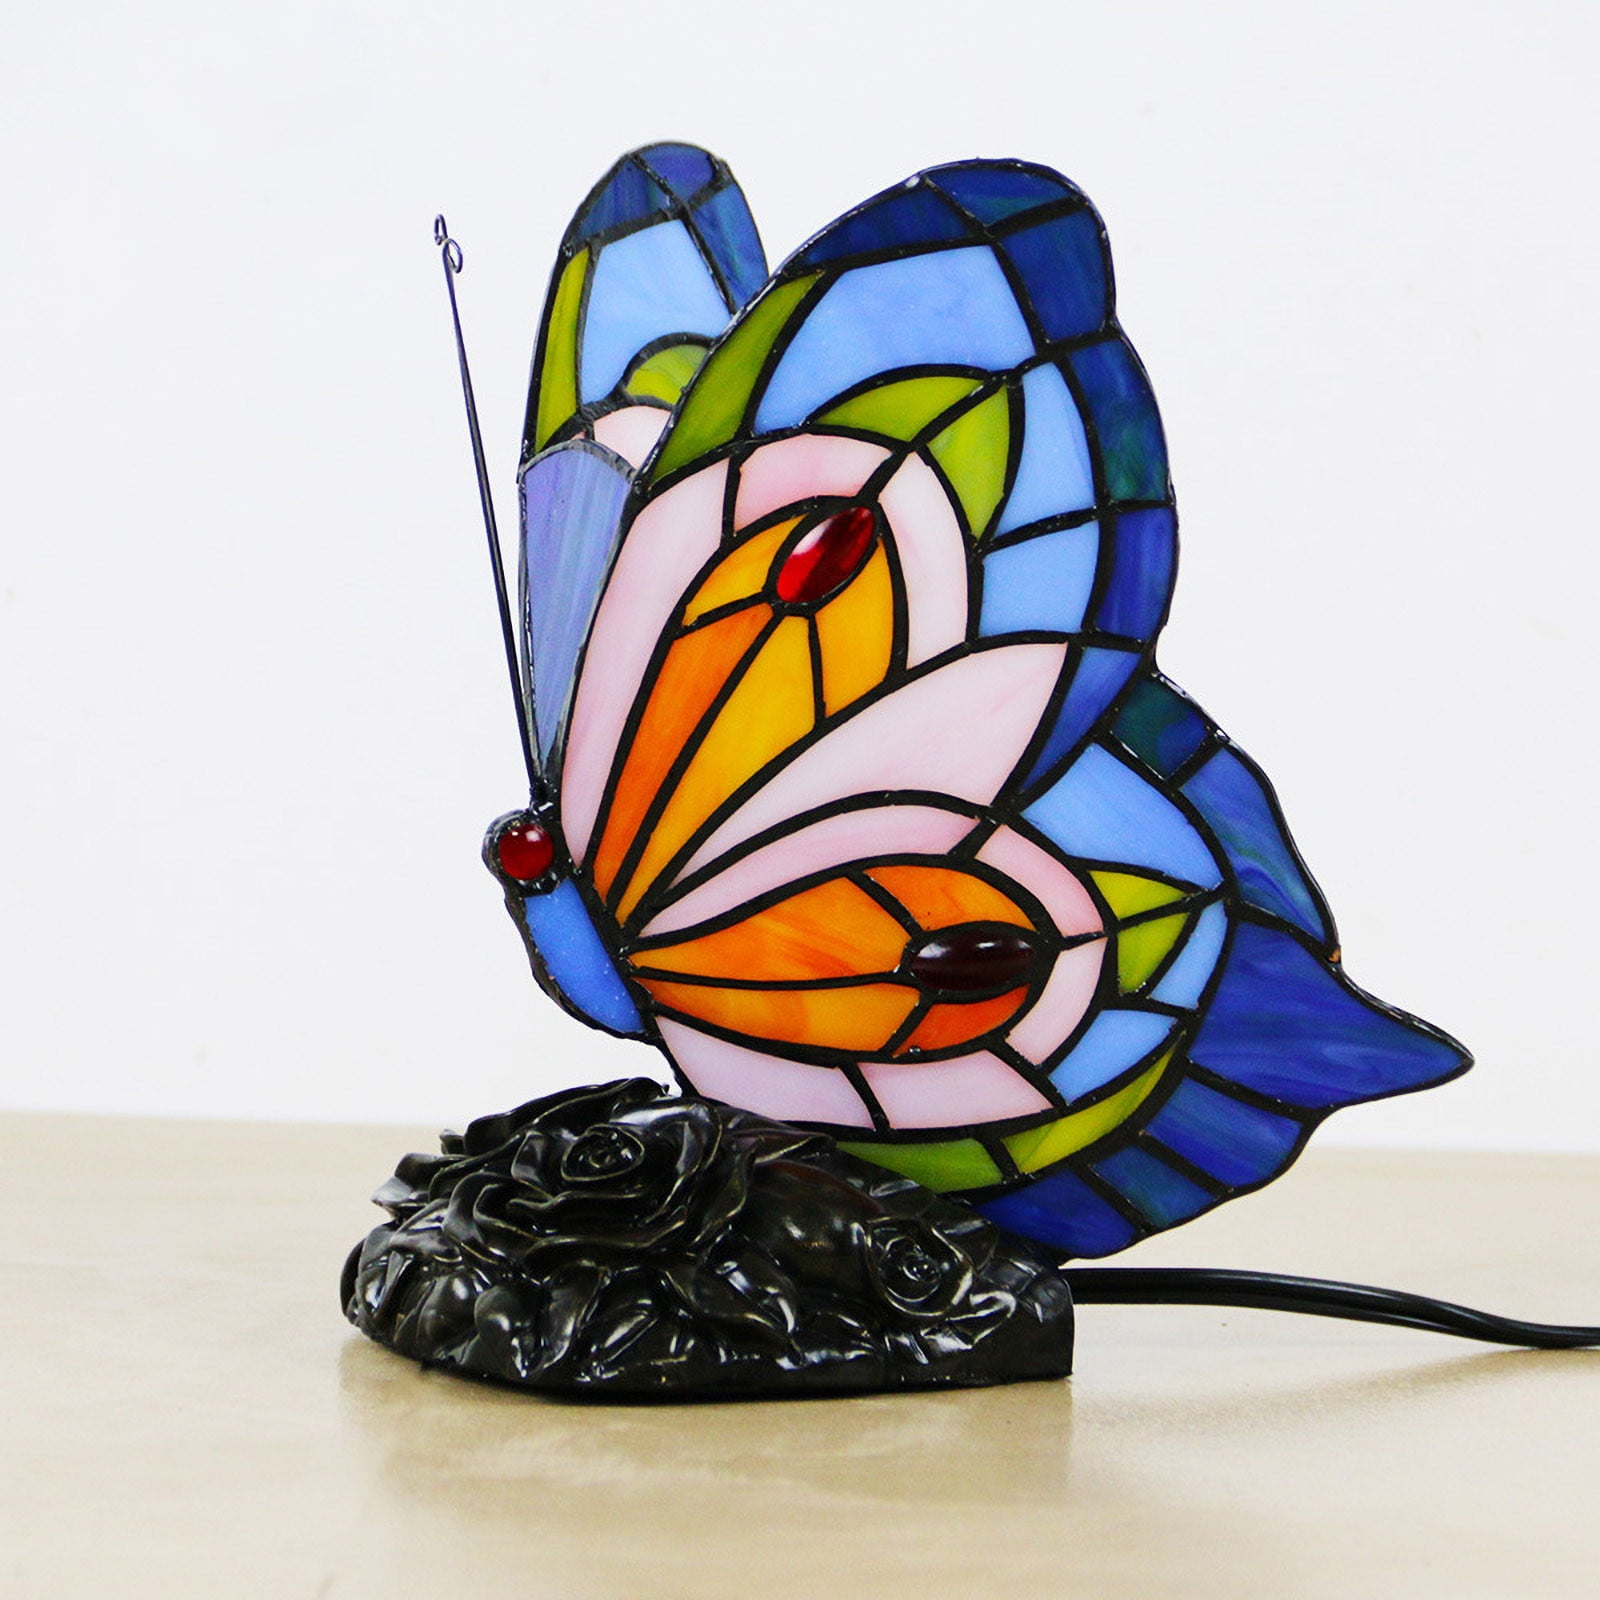 Stained Glass Handcrafted Butterfly Deco Girl Night Light Table Desk Lamp. 